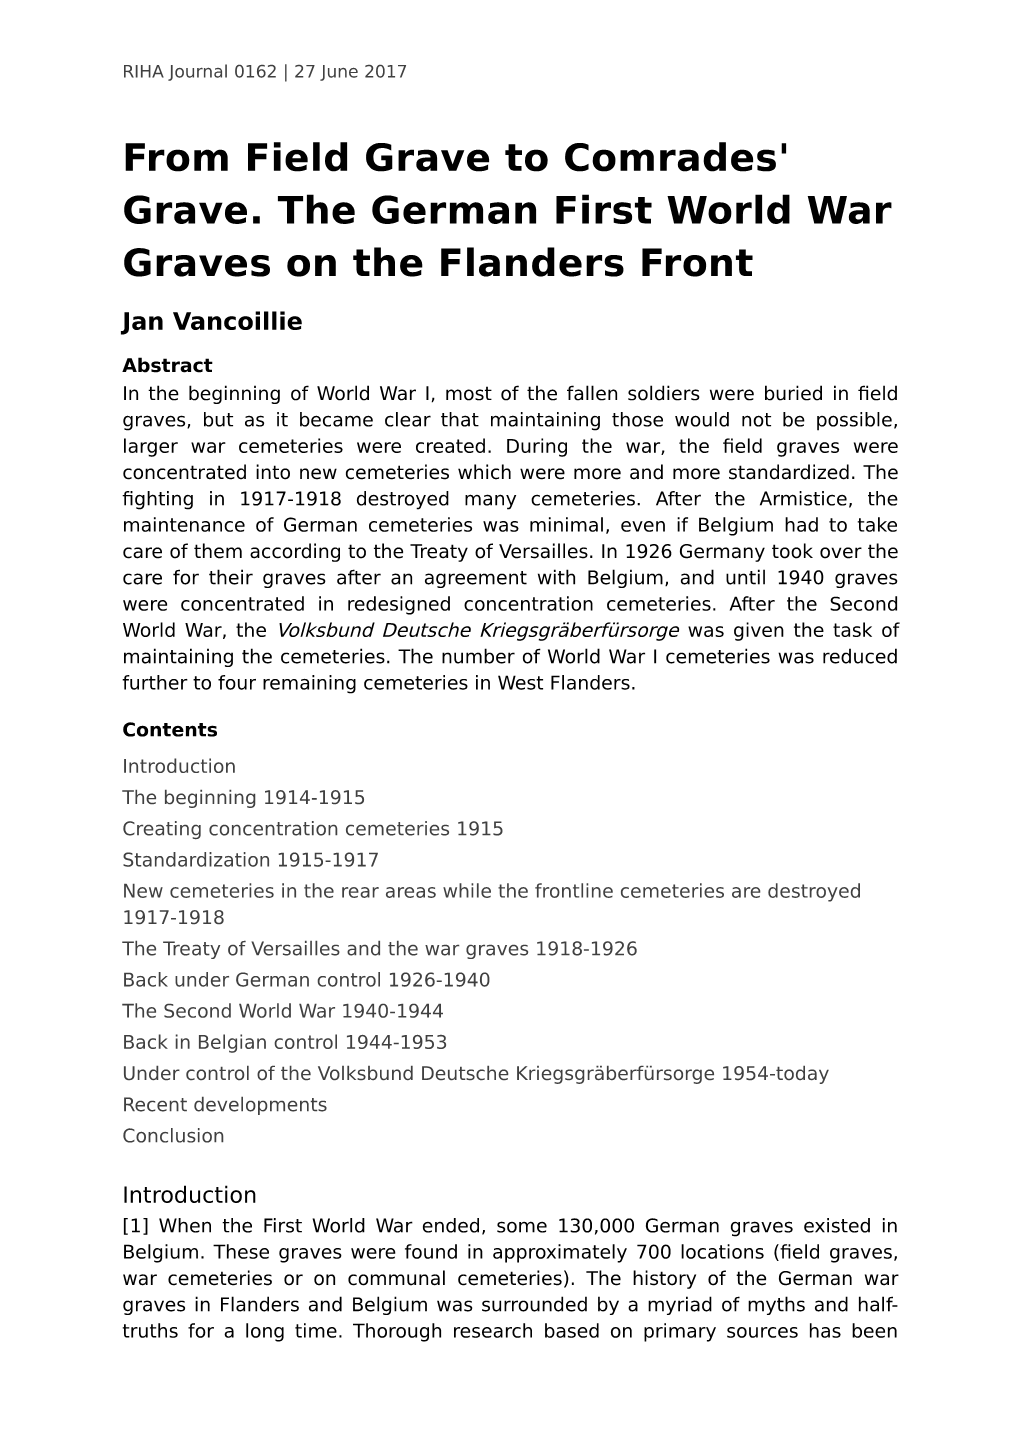 From Field Grave to Comrades' Grave. the German First World War Graves on the Flanders Front